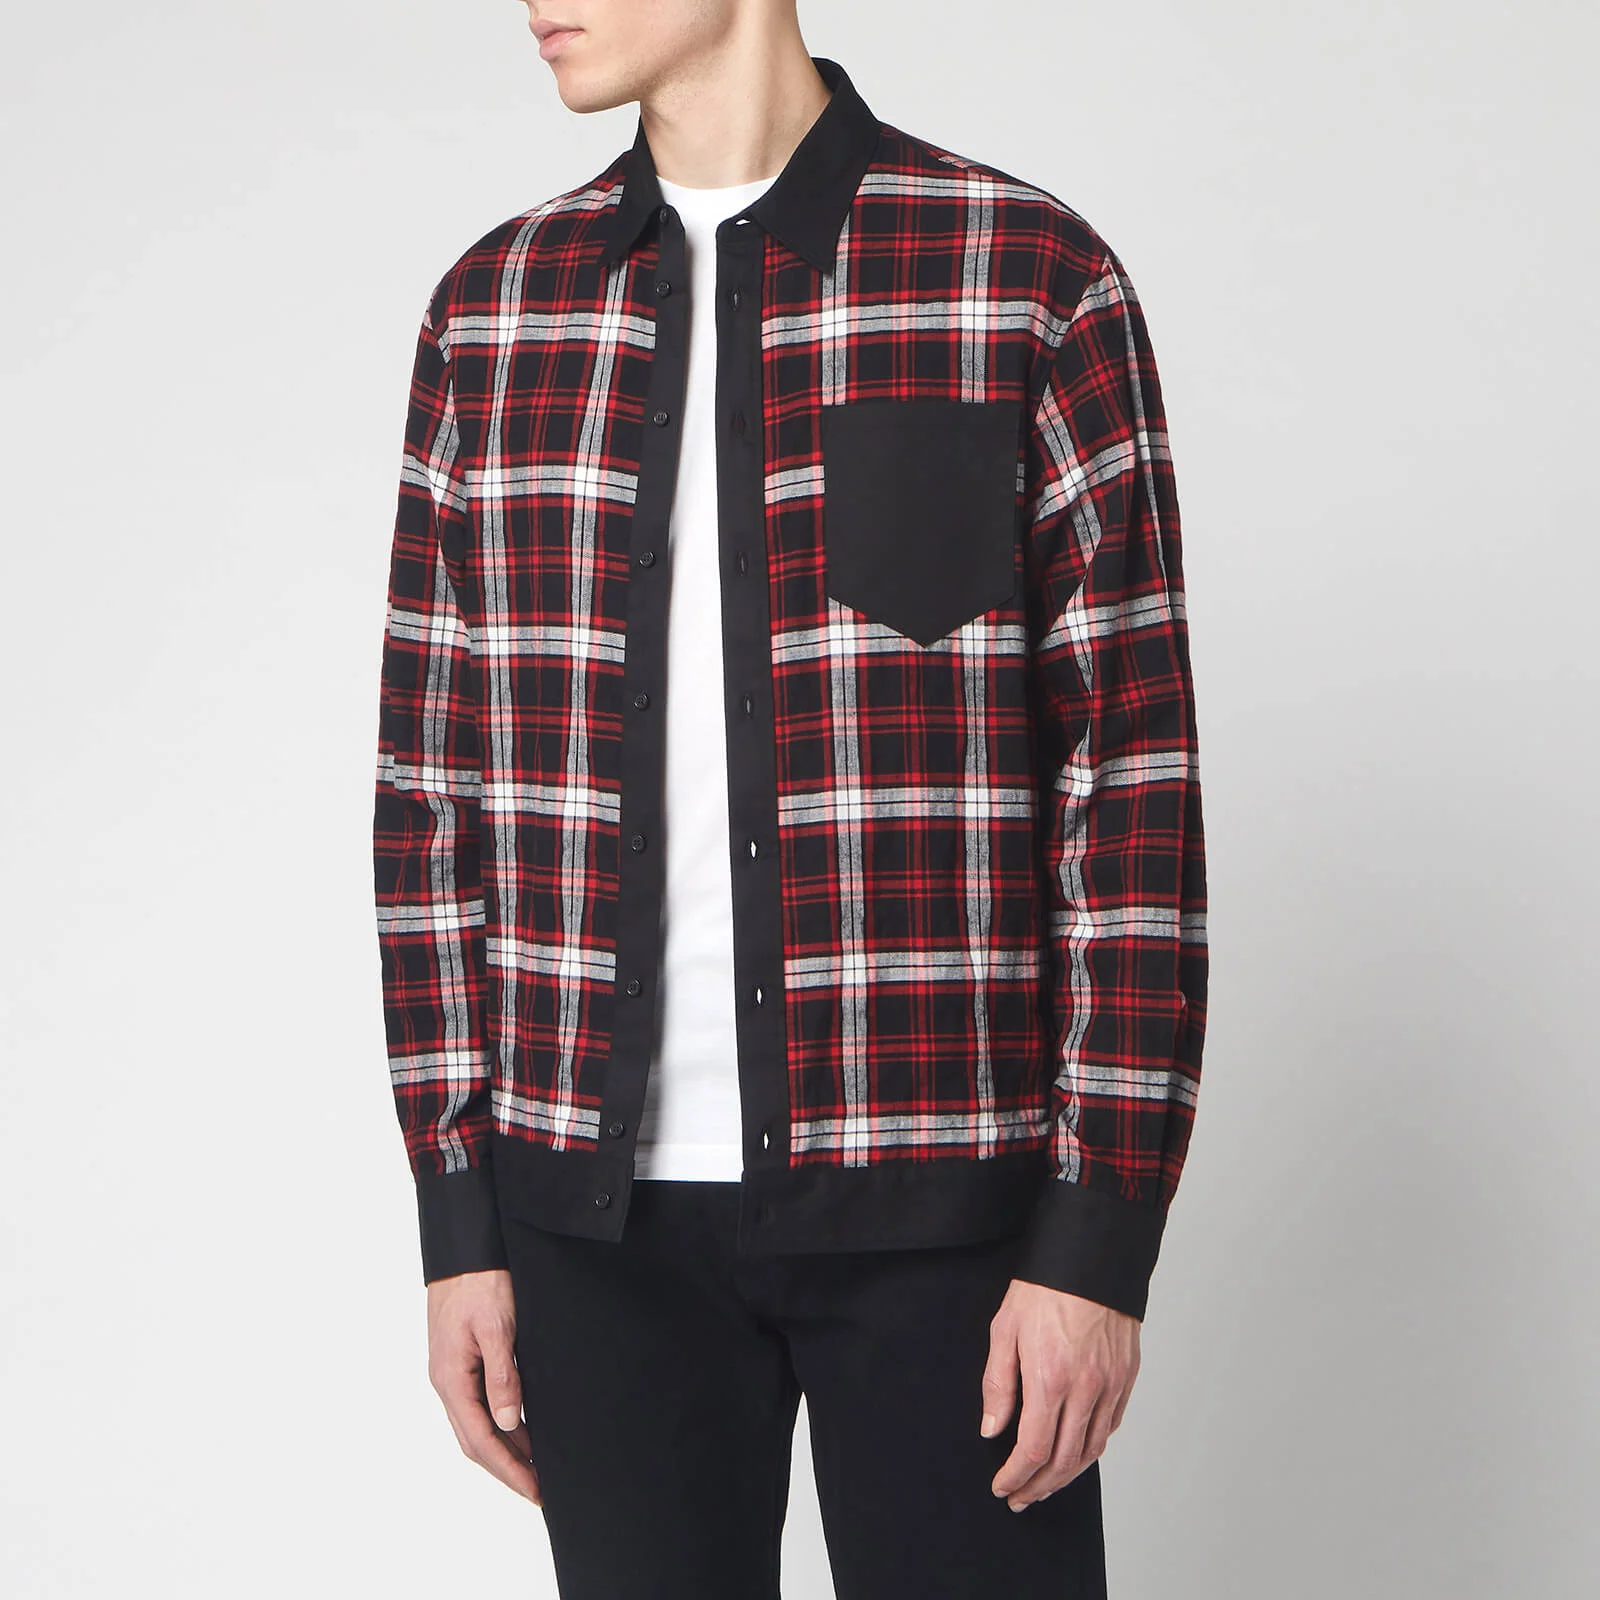 Dsquared2 Men's Cotton and Check Bowling Shirt with Logo Print On Back - Black/Red/White Image 1